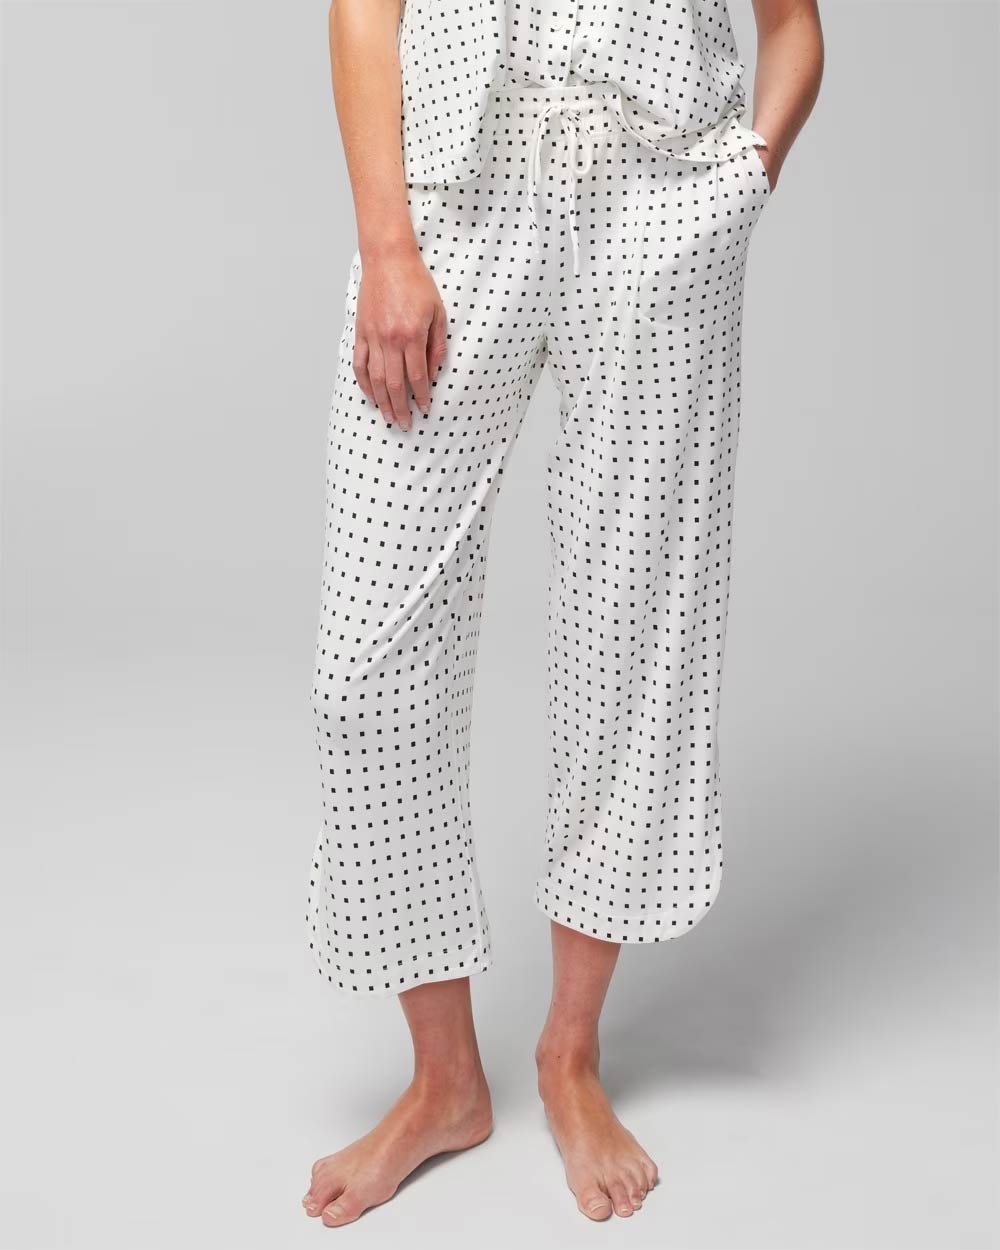 Soma<sup class=st-superscript>®</sup> women’s model wearing white and black polka dot cropped pajama pants.